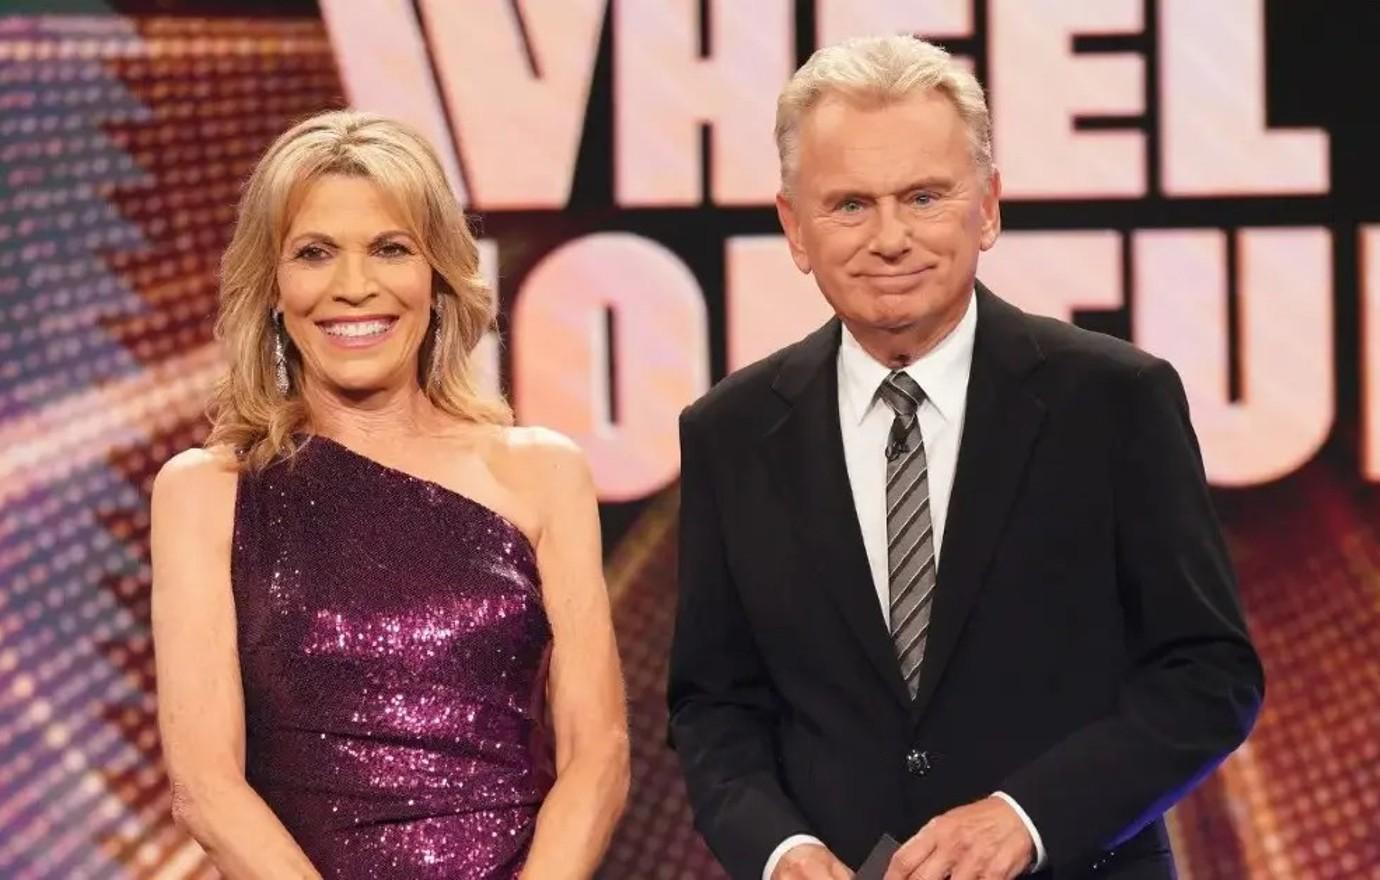 Ryan Seacrest In Talks To Replace Pat Sajak As 'Wheel Of Fortune' Host